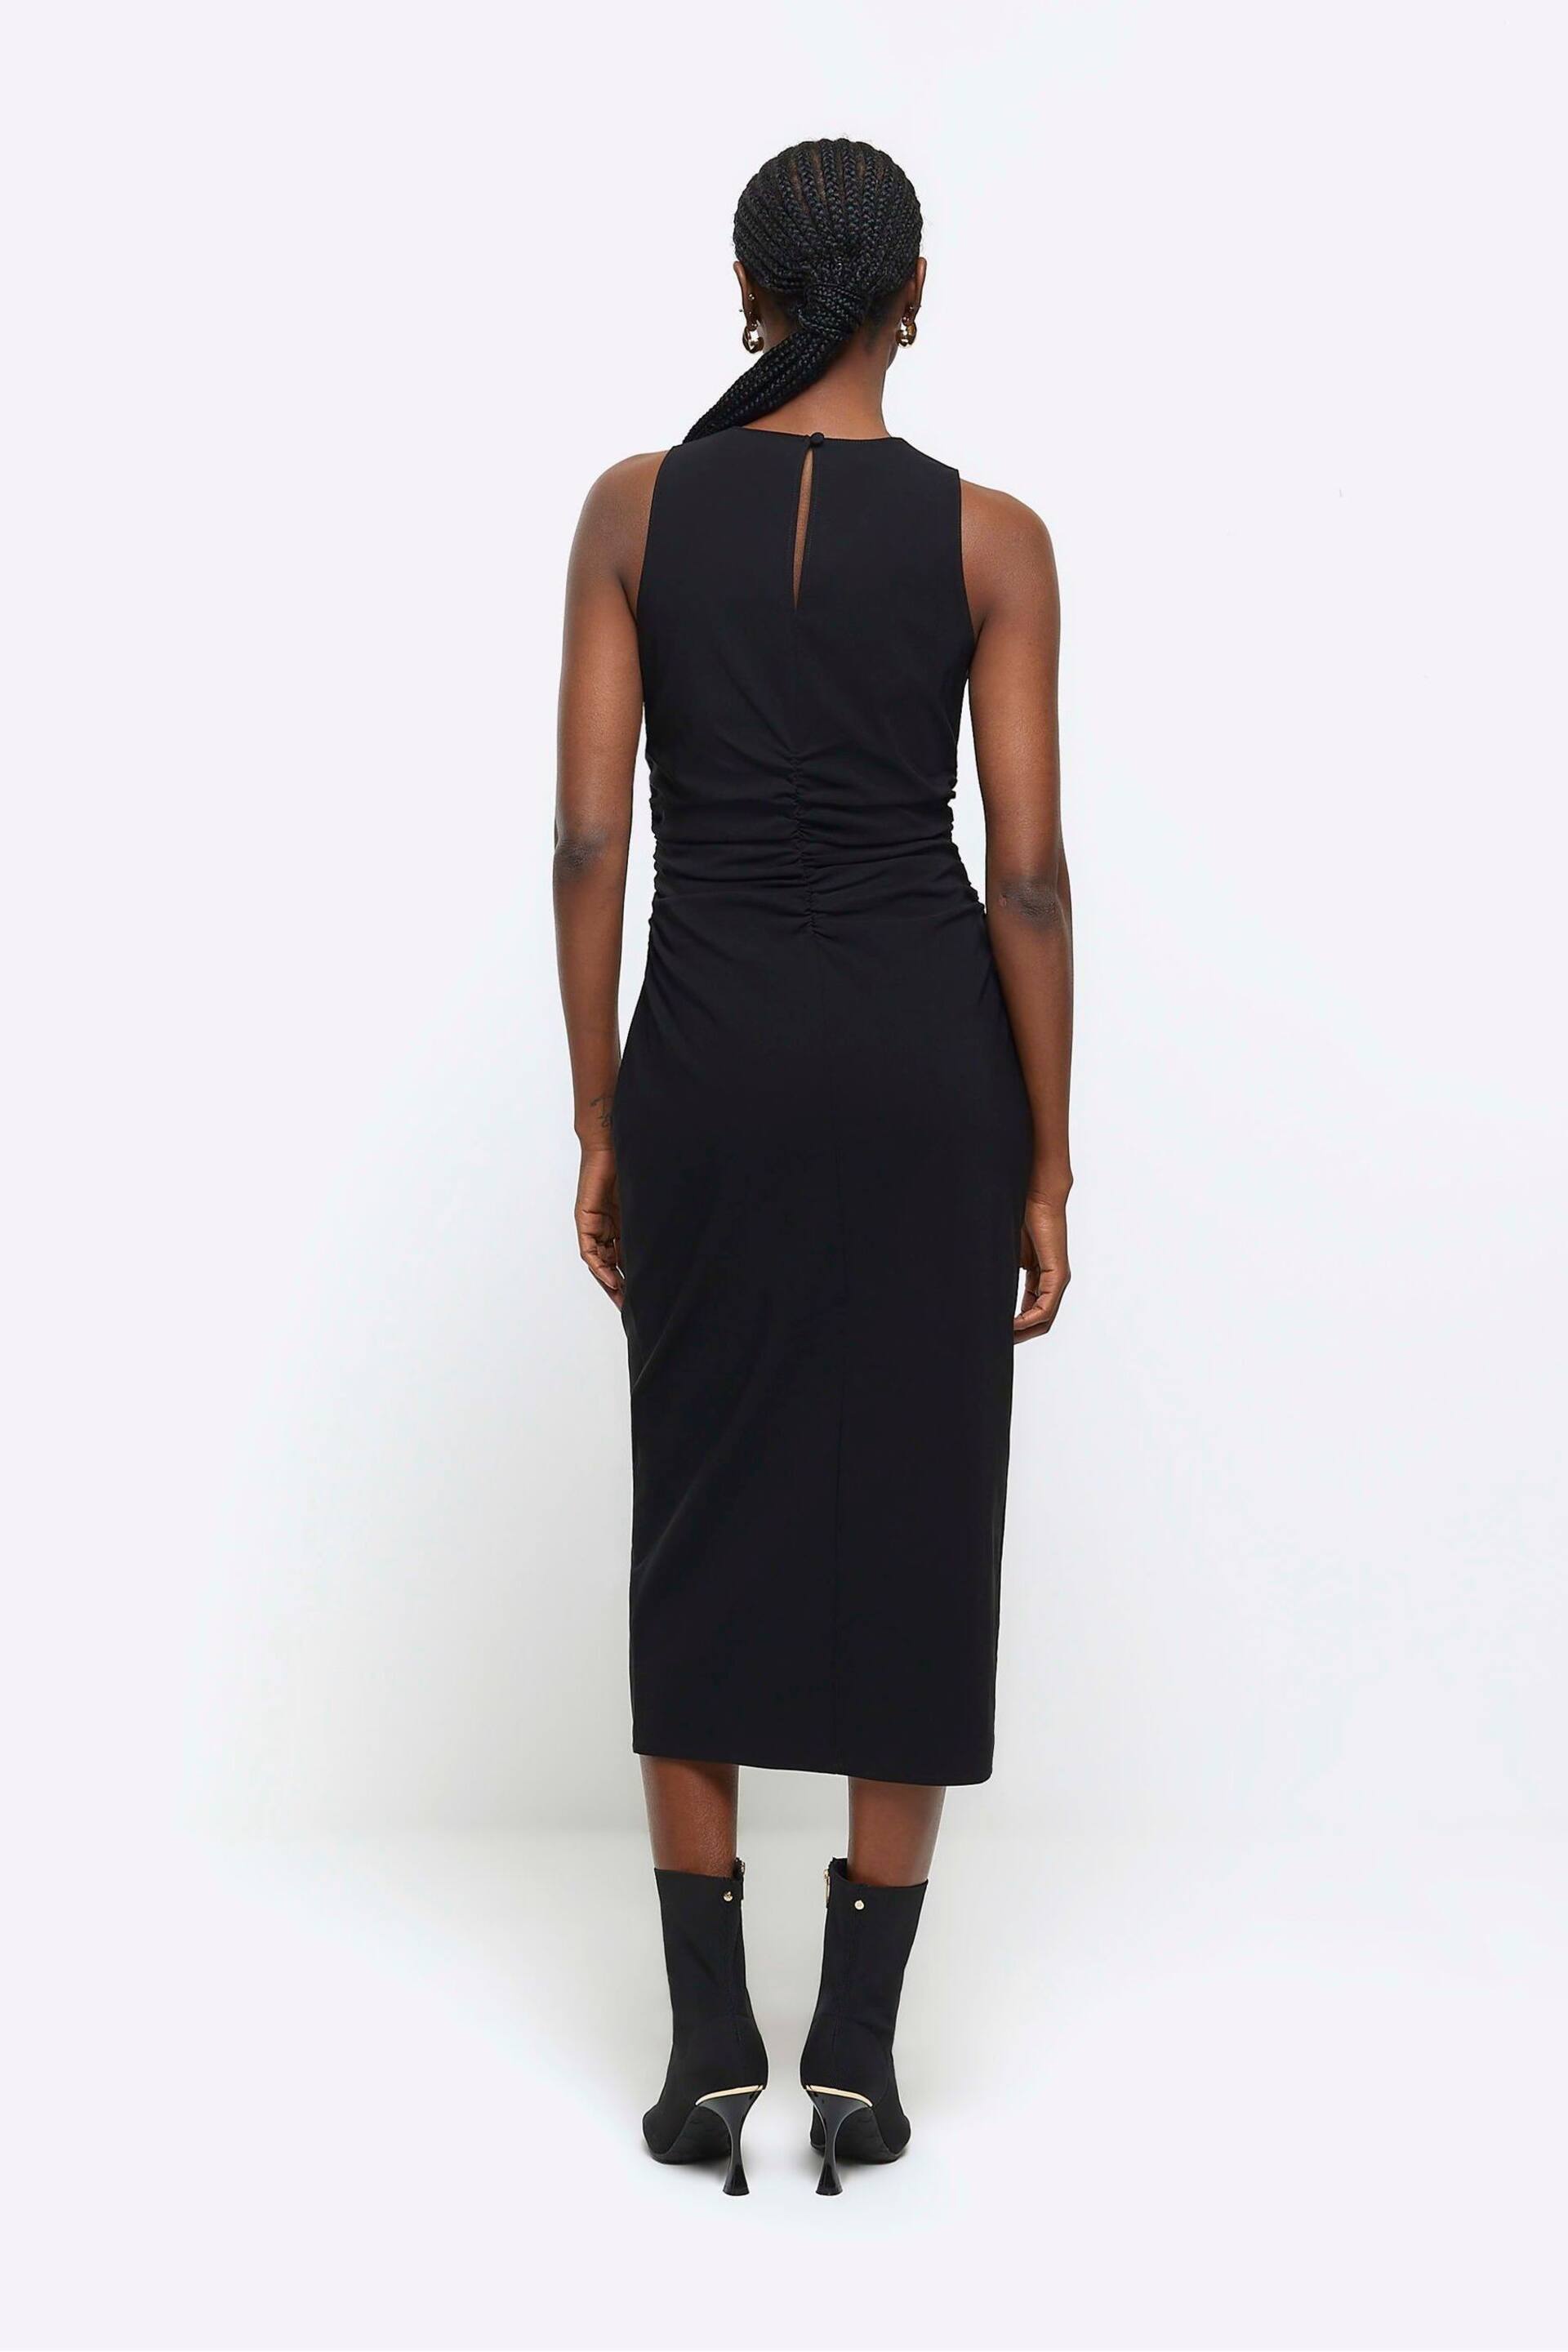 River Island Black Sleeveless Ruched Detail Dress - Image 2 of 4